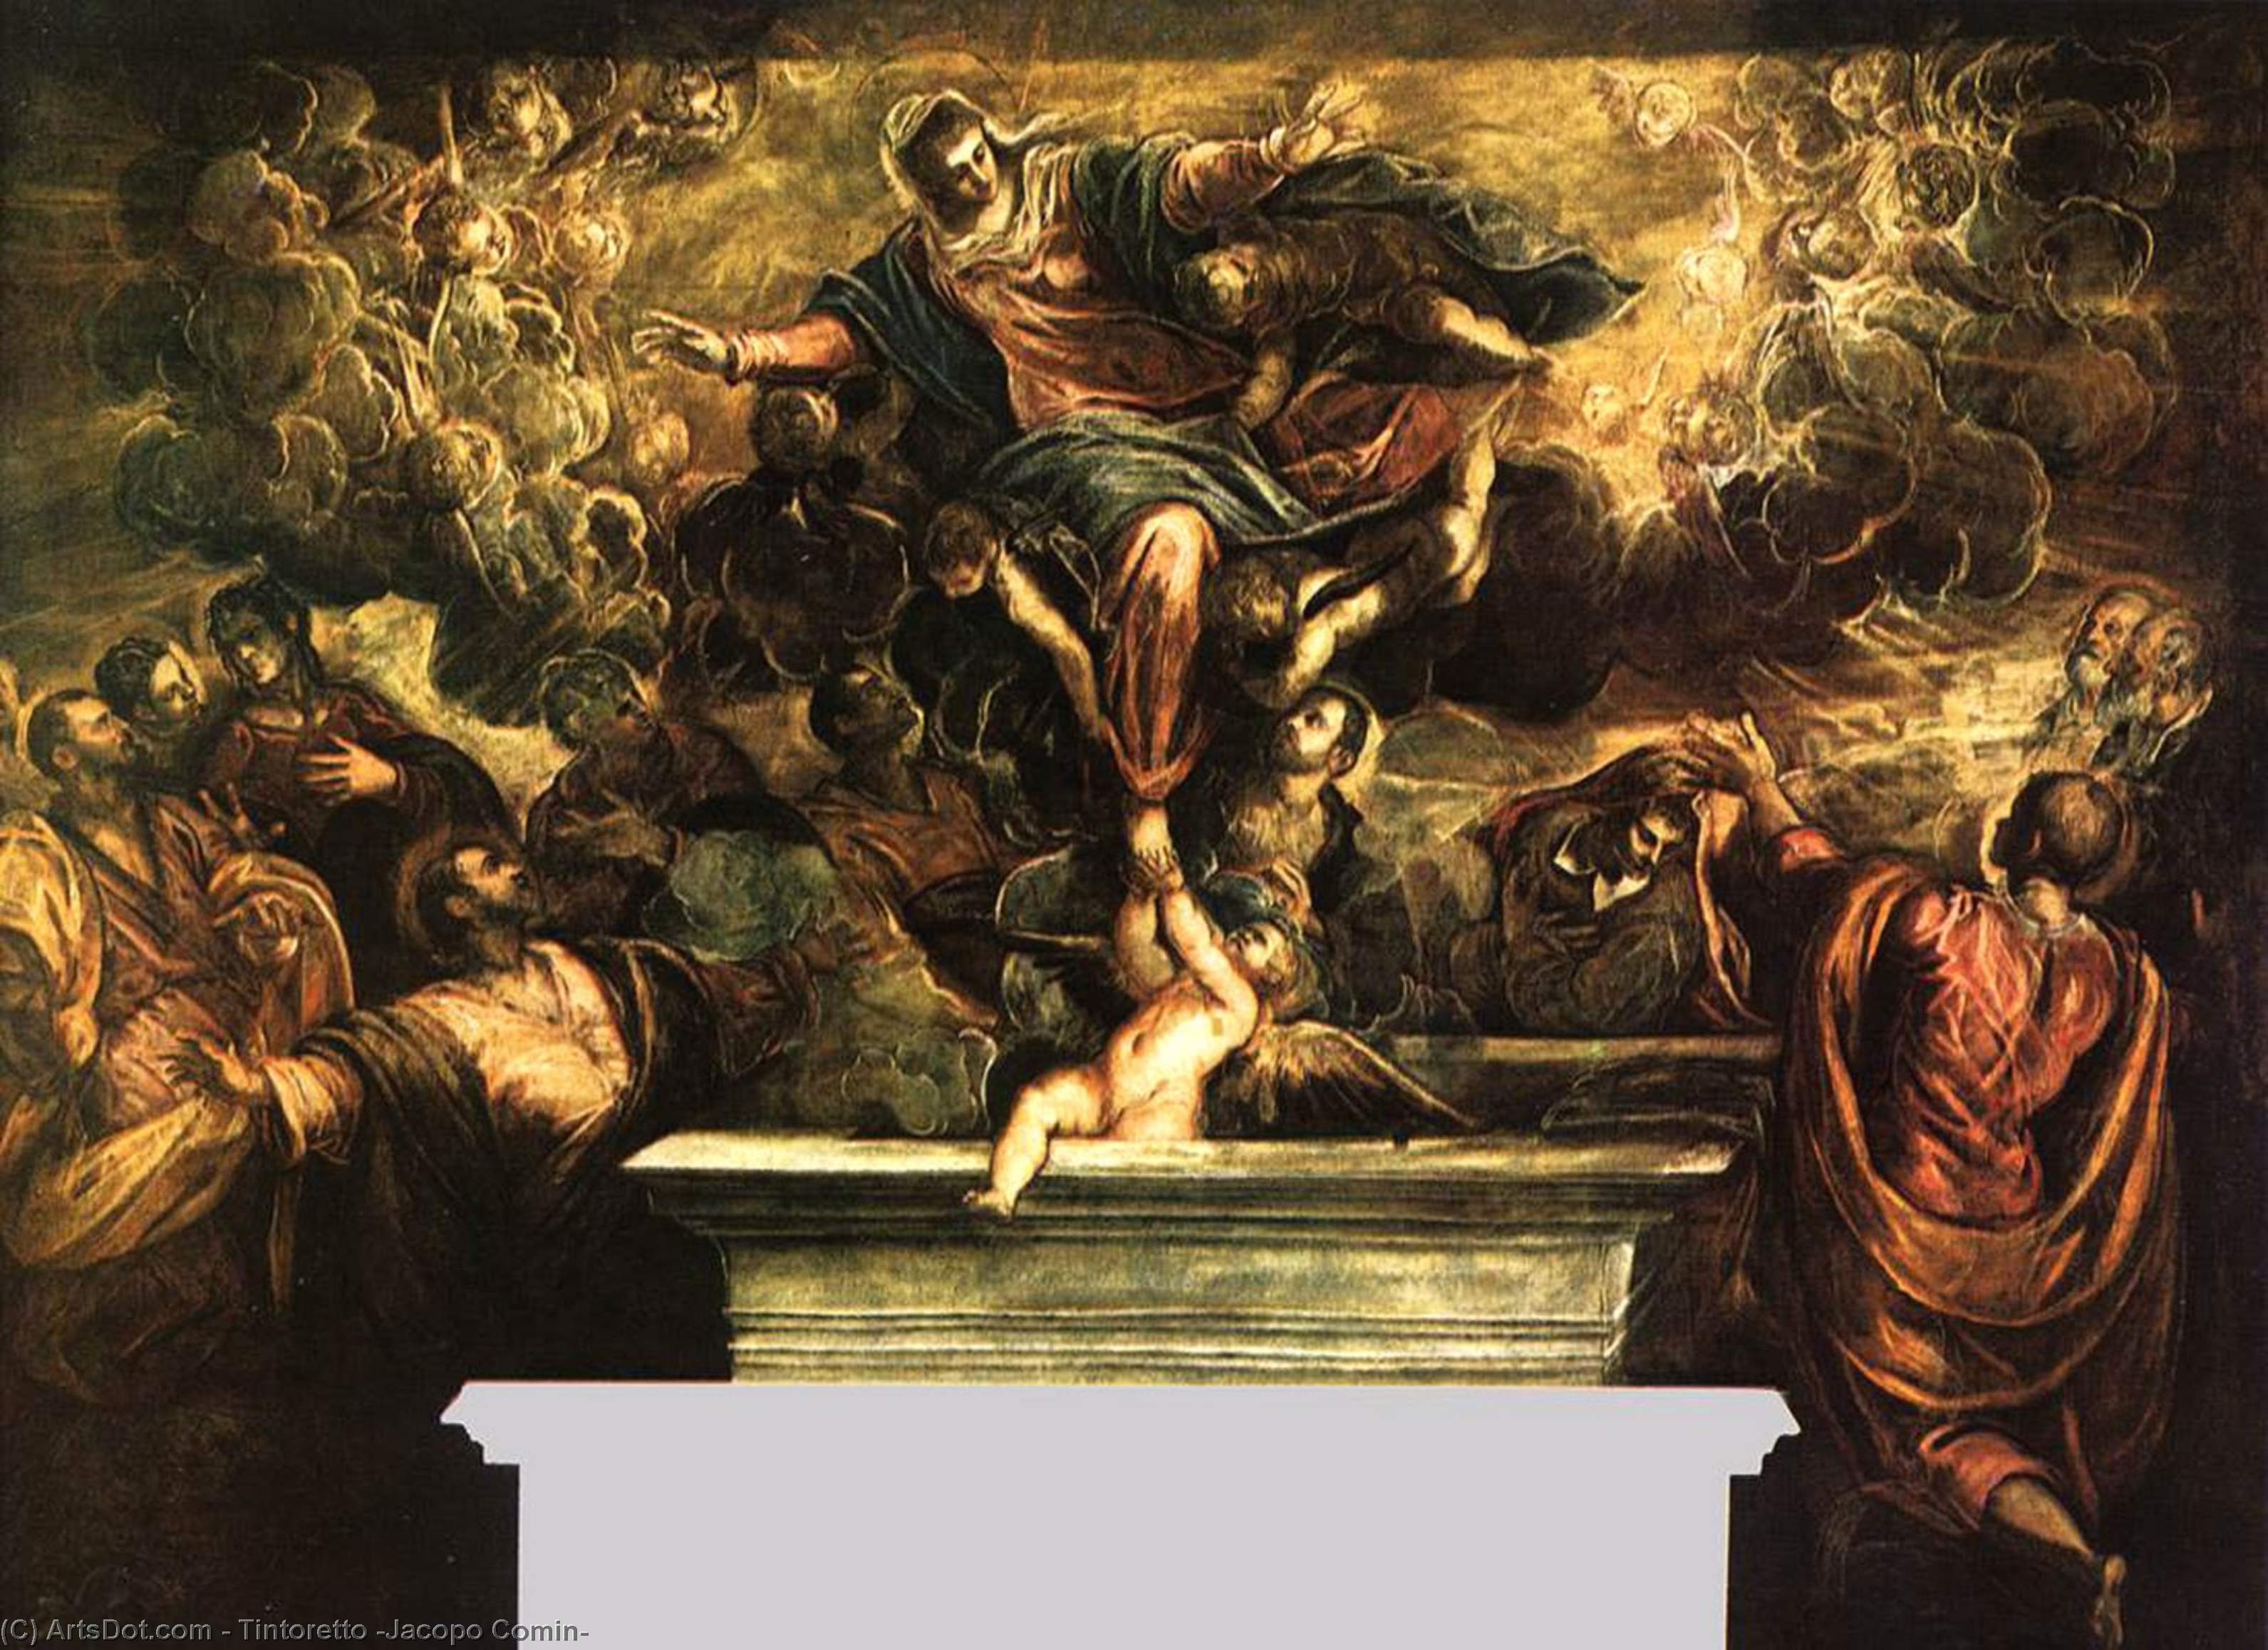 Wikioo.org - สารานุกรมวิจิตรศิลป์ - จิตรกรรม Tintoretto (Jacopo Comin) - The Assumption of the Virgin